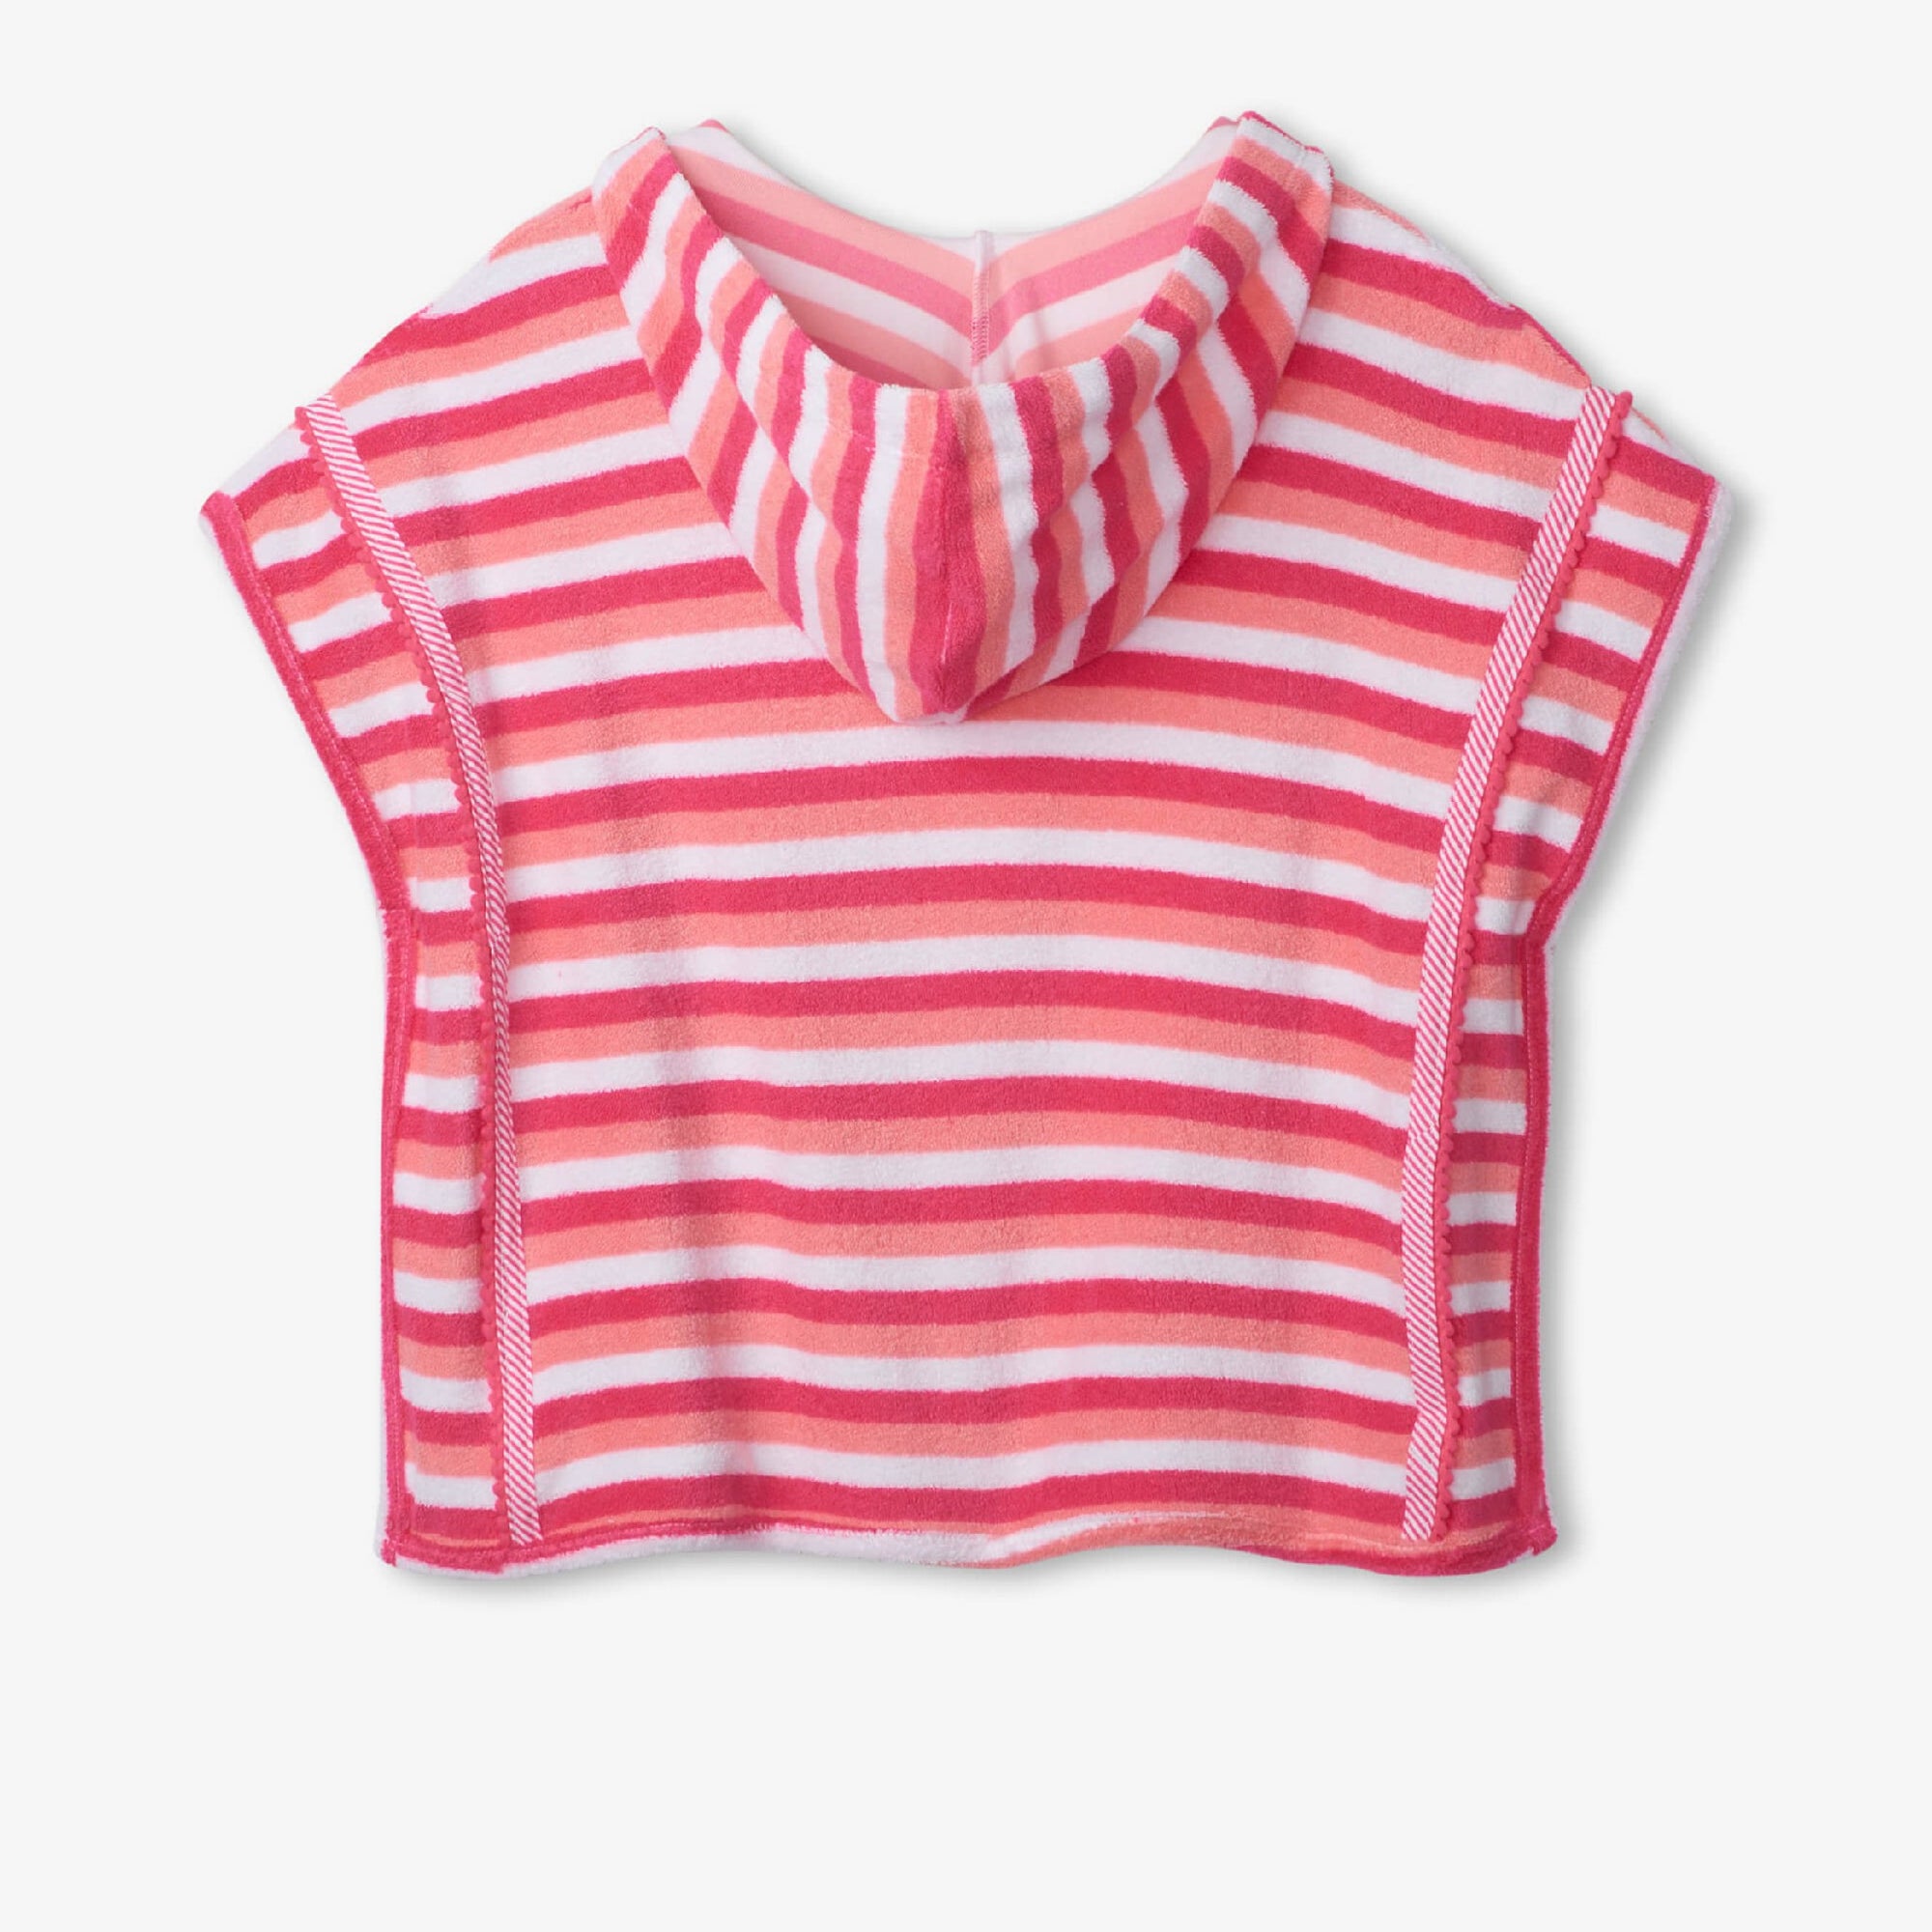 Hatley Girls Cotton Candy Stripes Hooded Terry Cover Up